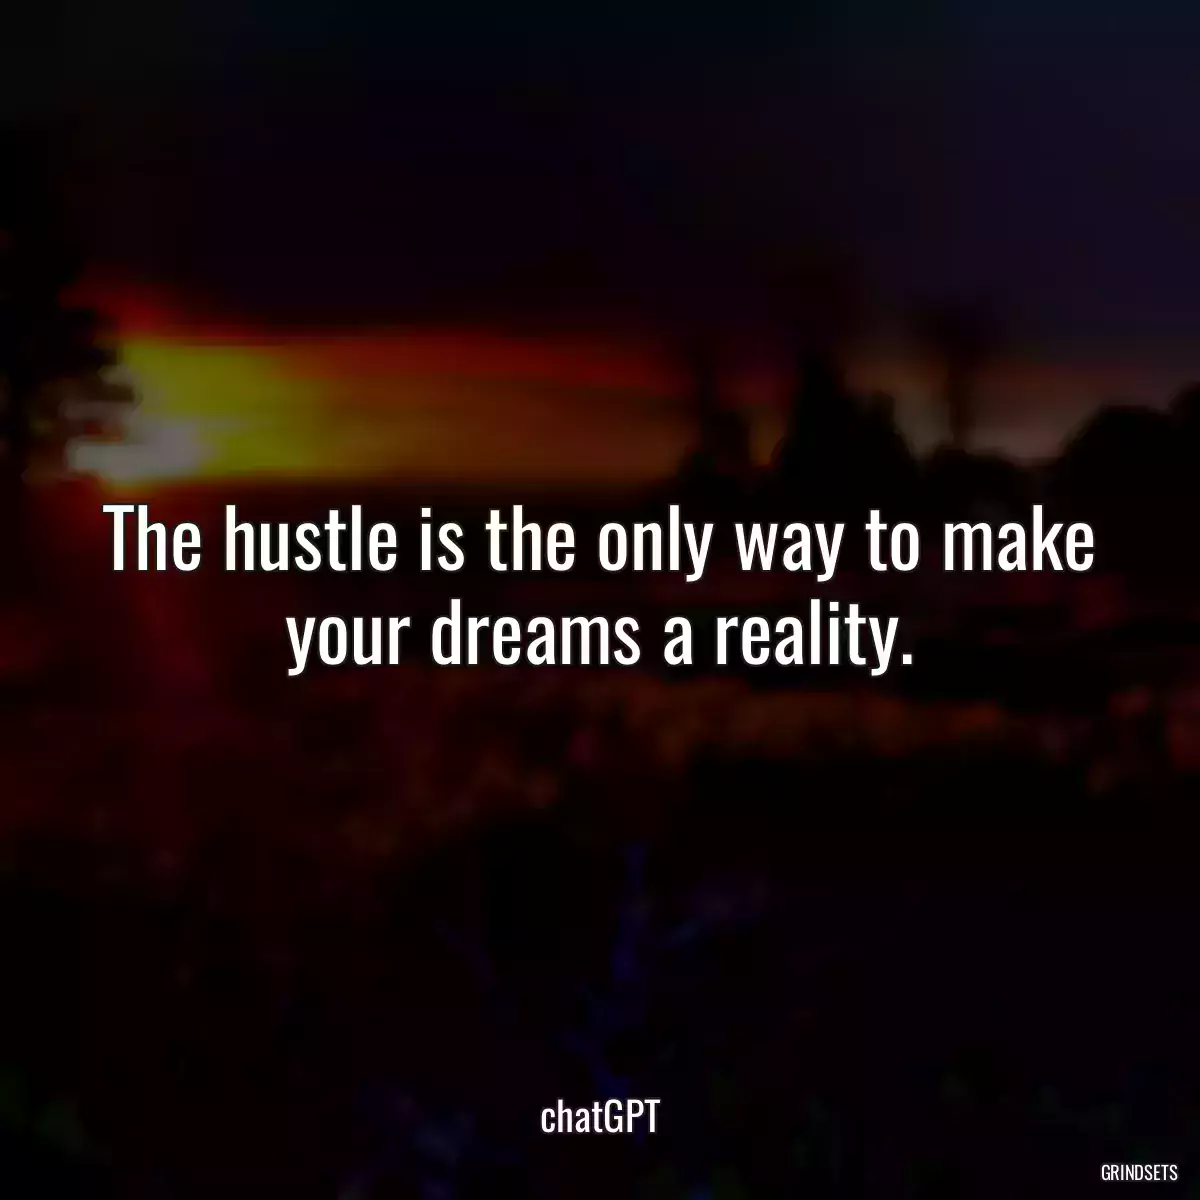 The hustle is the only way to make your dreams a reality.